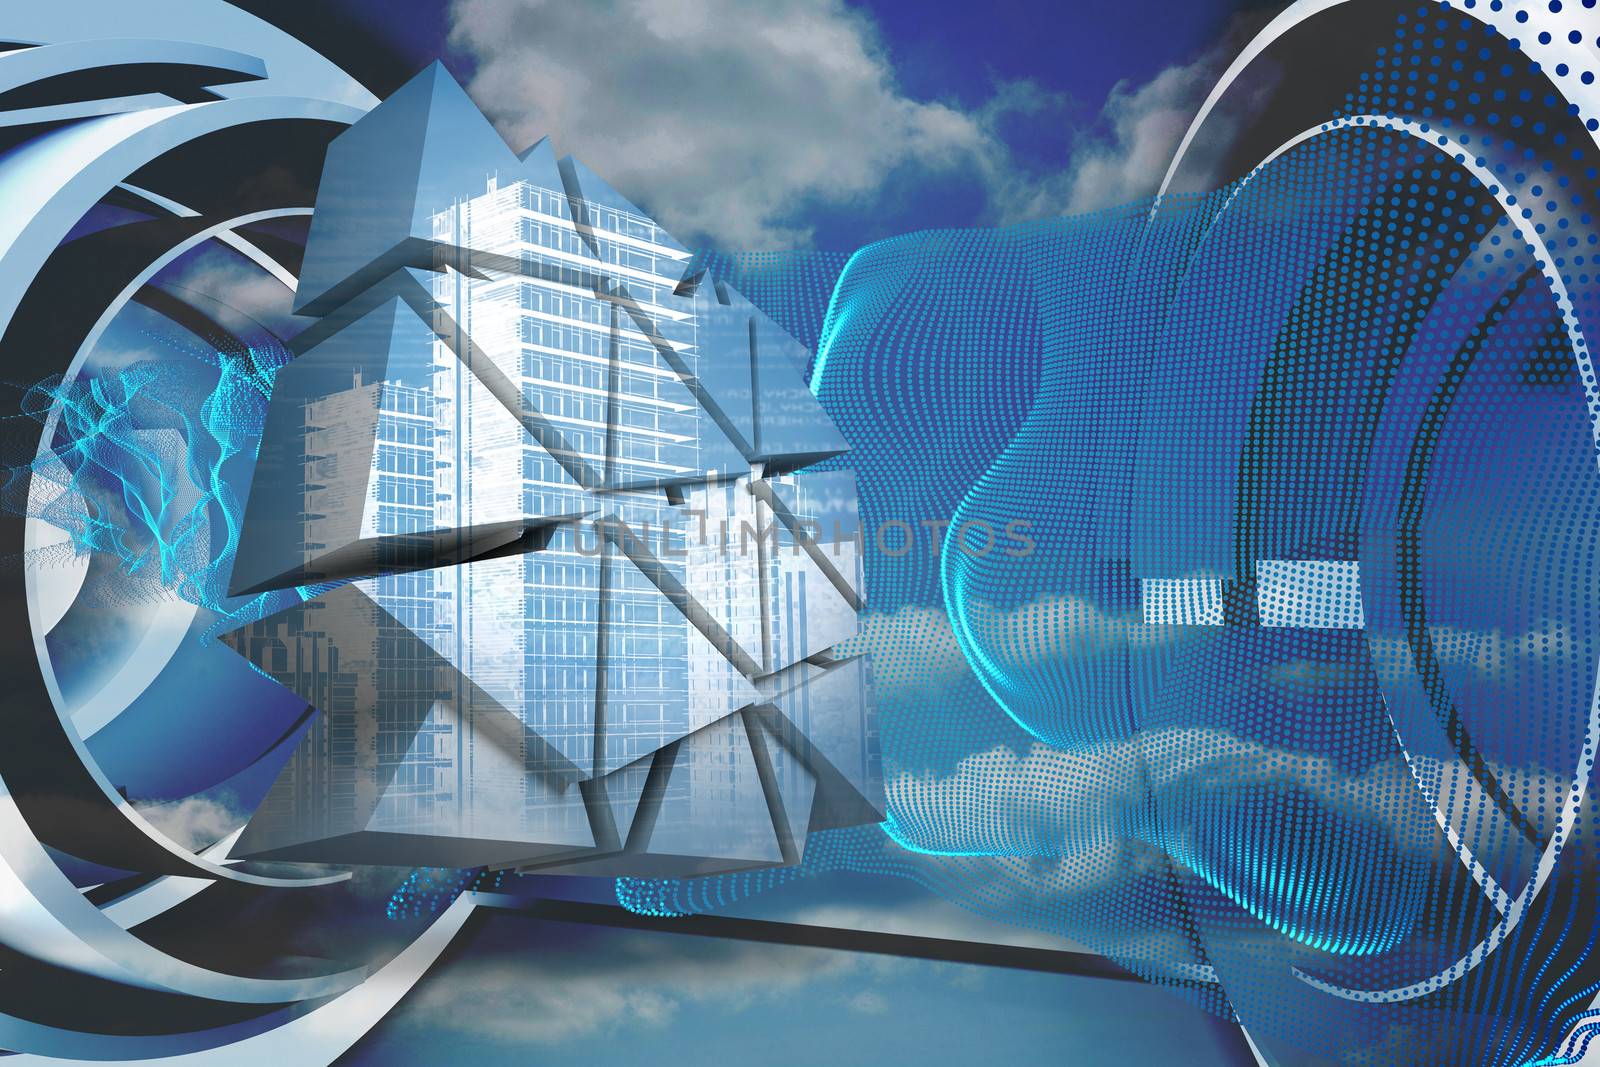 Cityscape on abstract screen against abstract blue design in futuristic structure